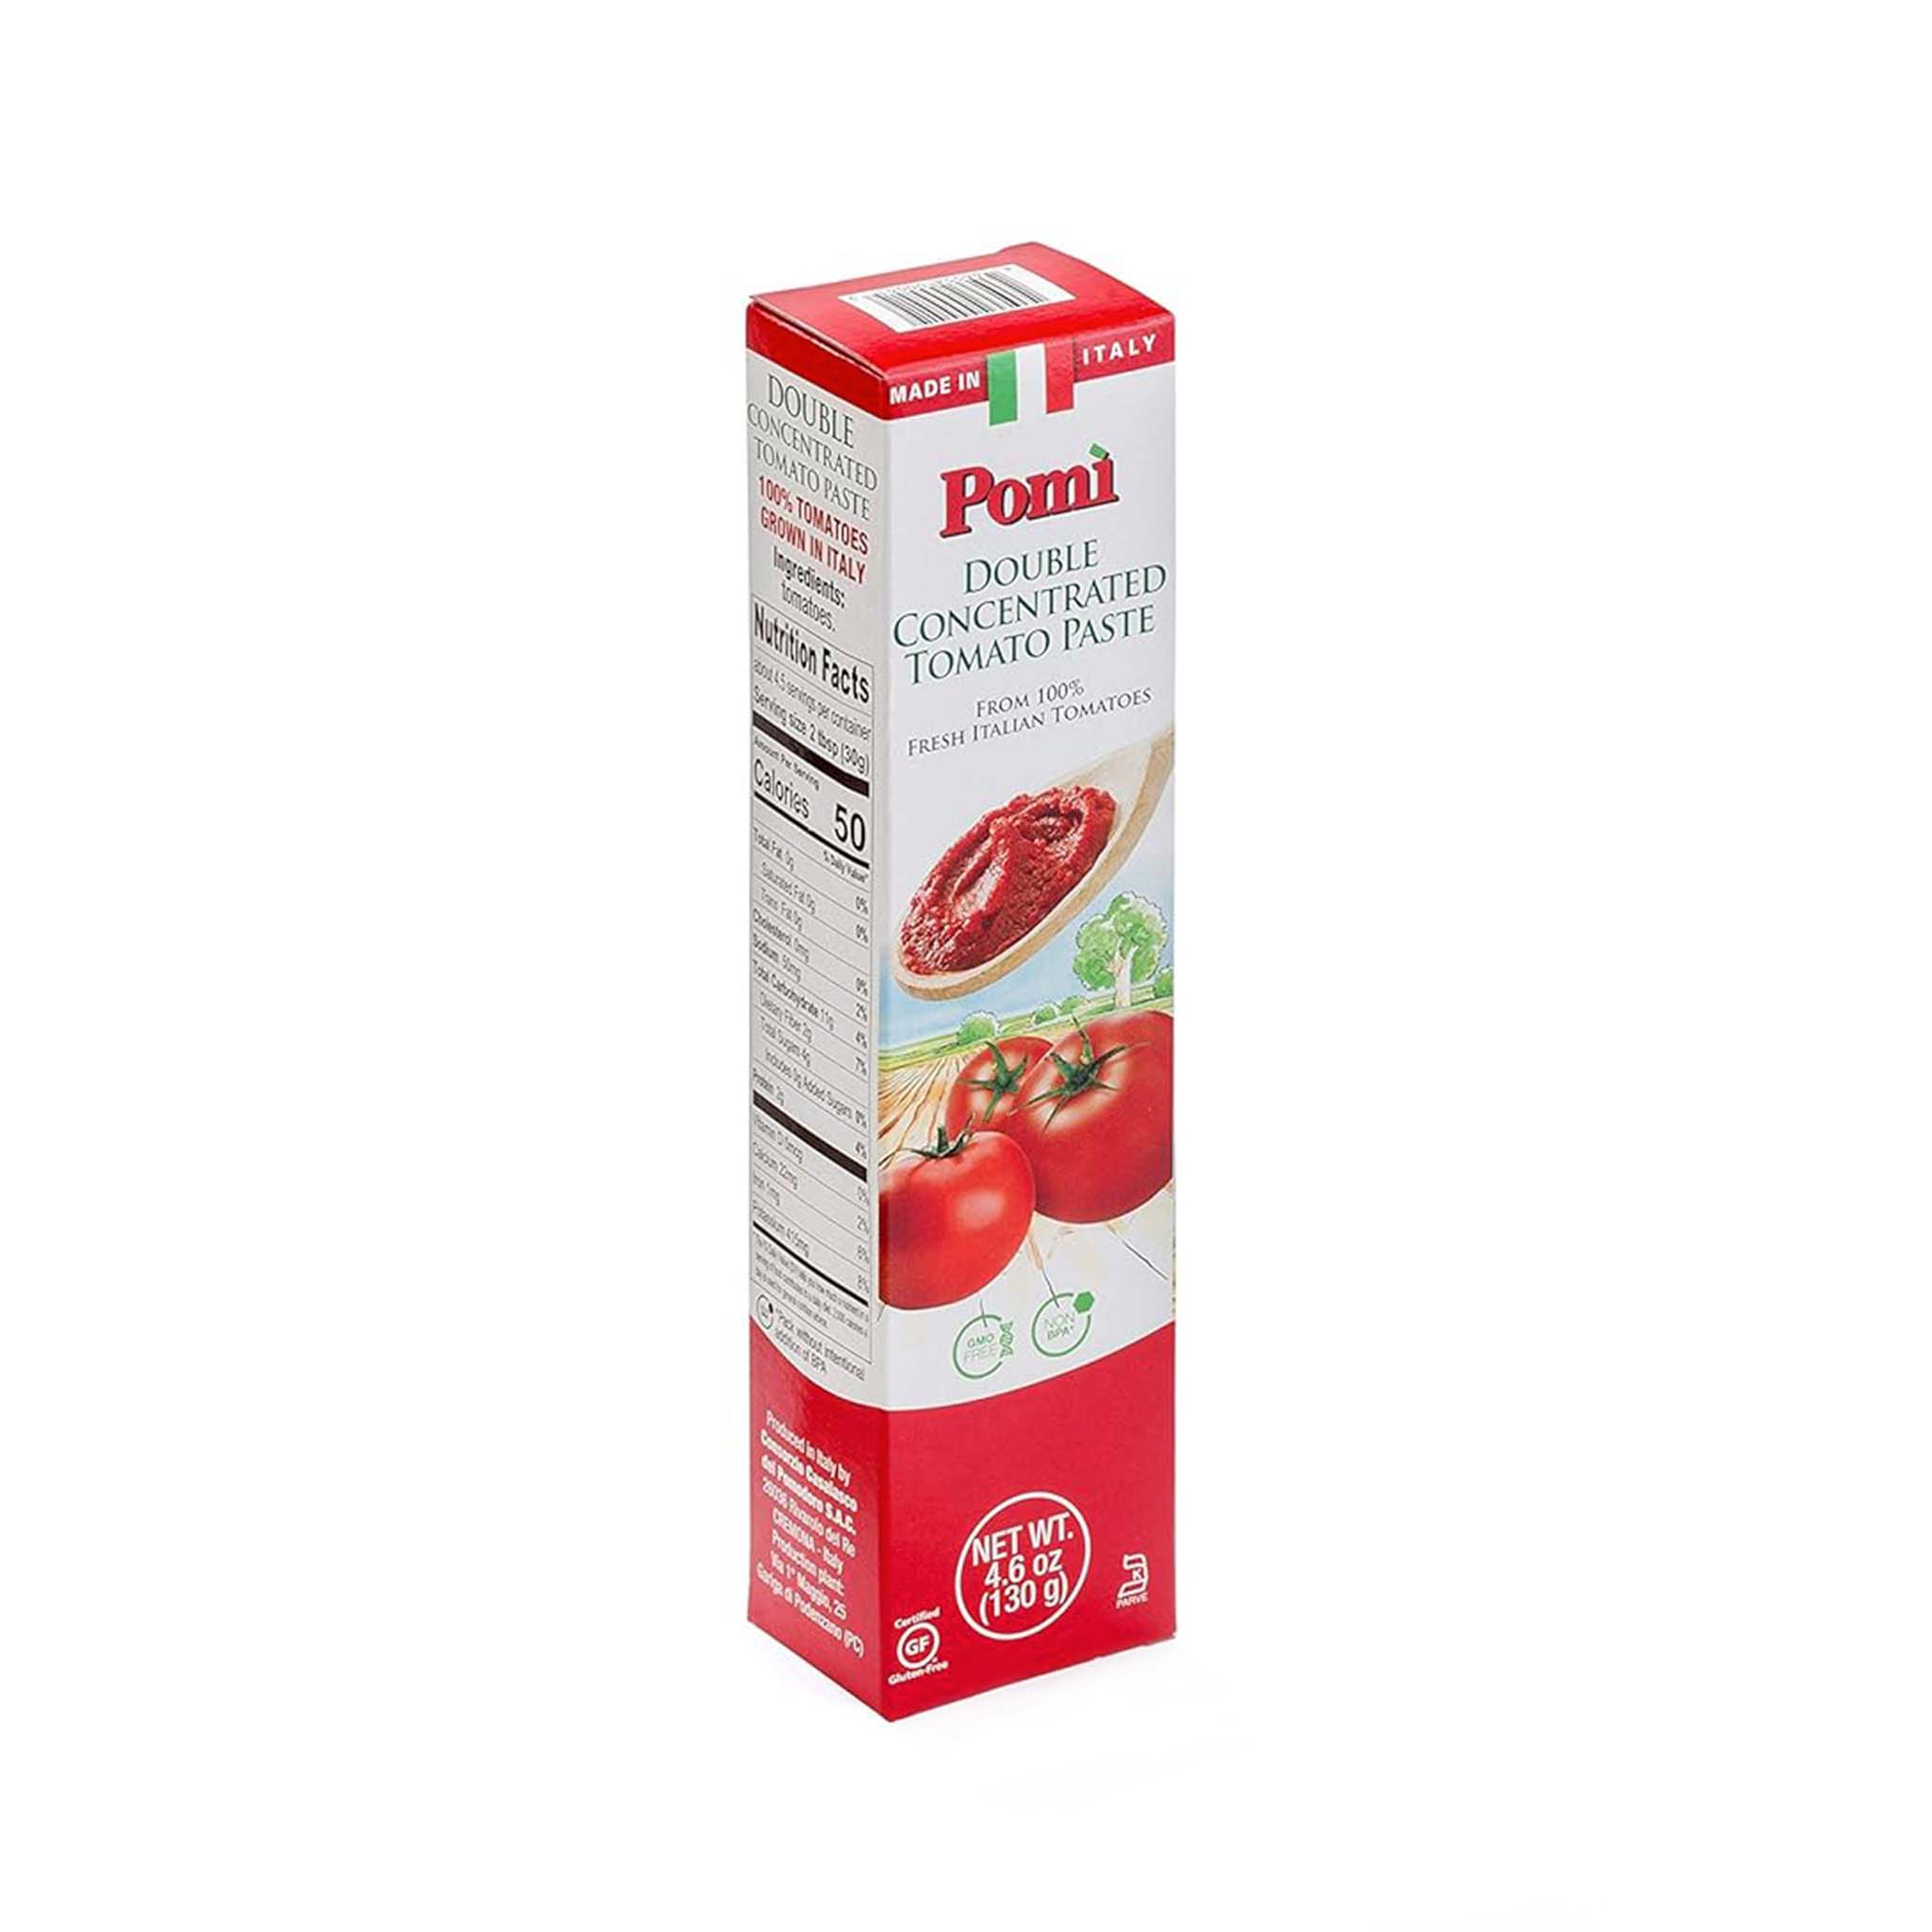 Pomi Concentrated Tomato Paste